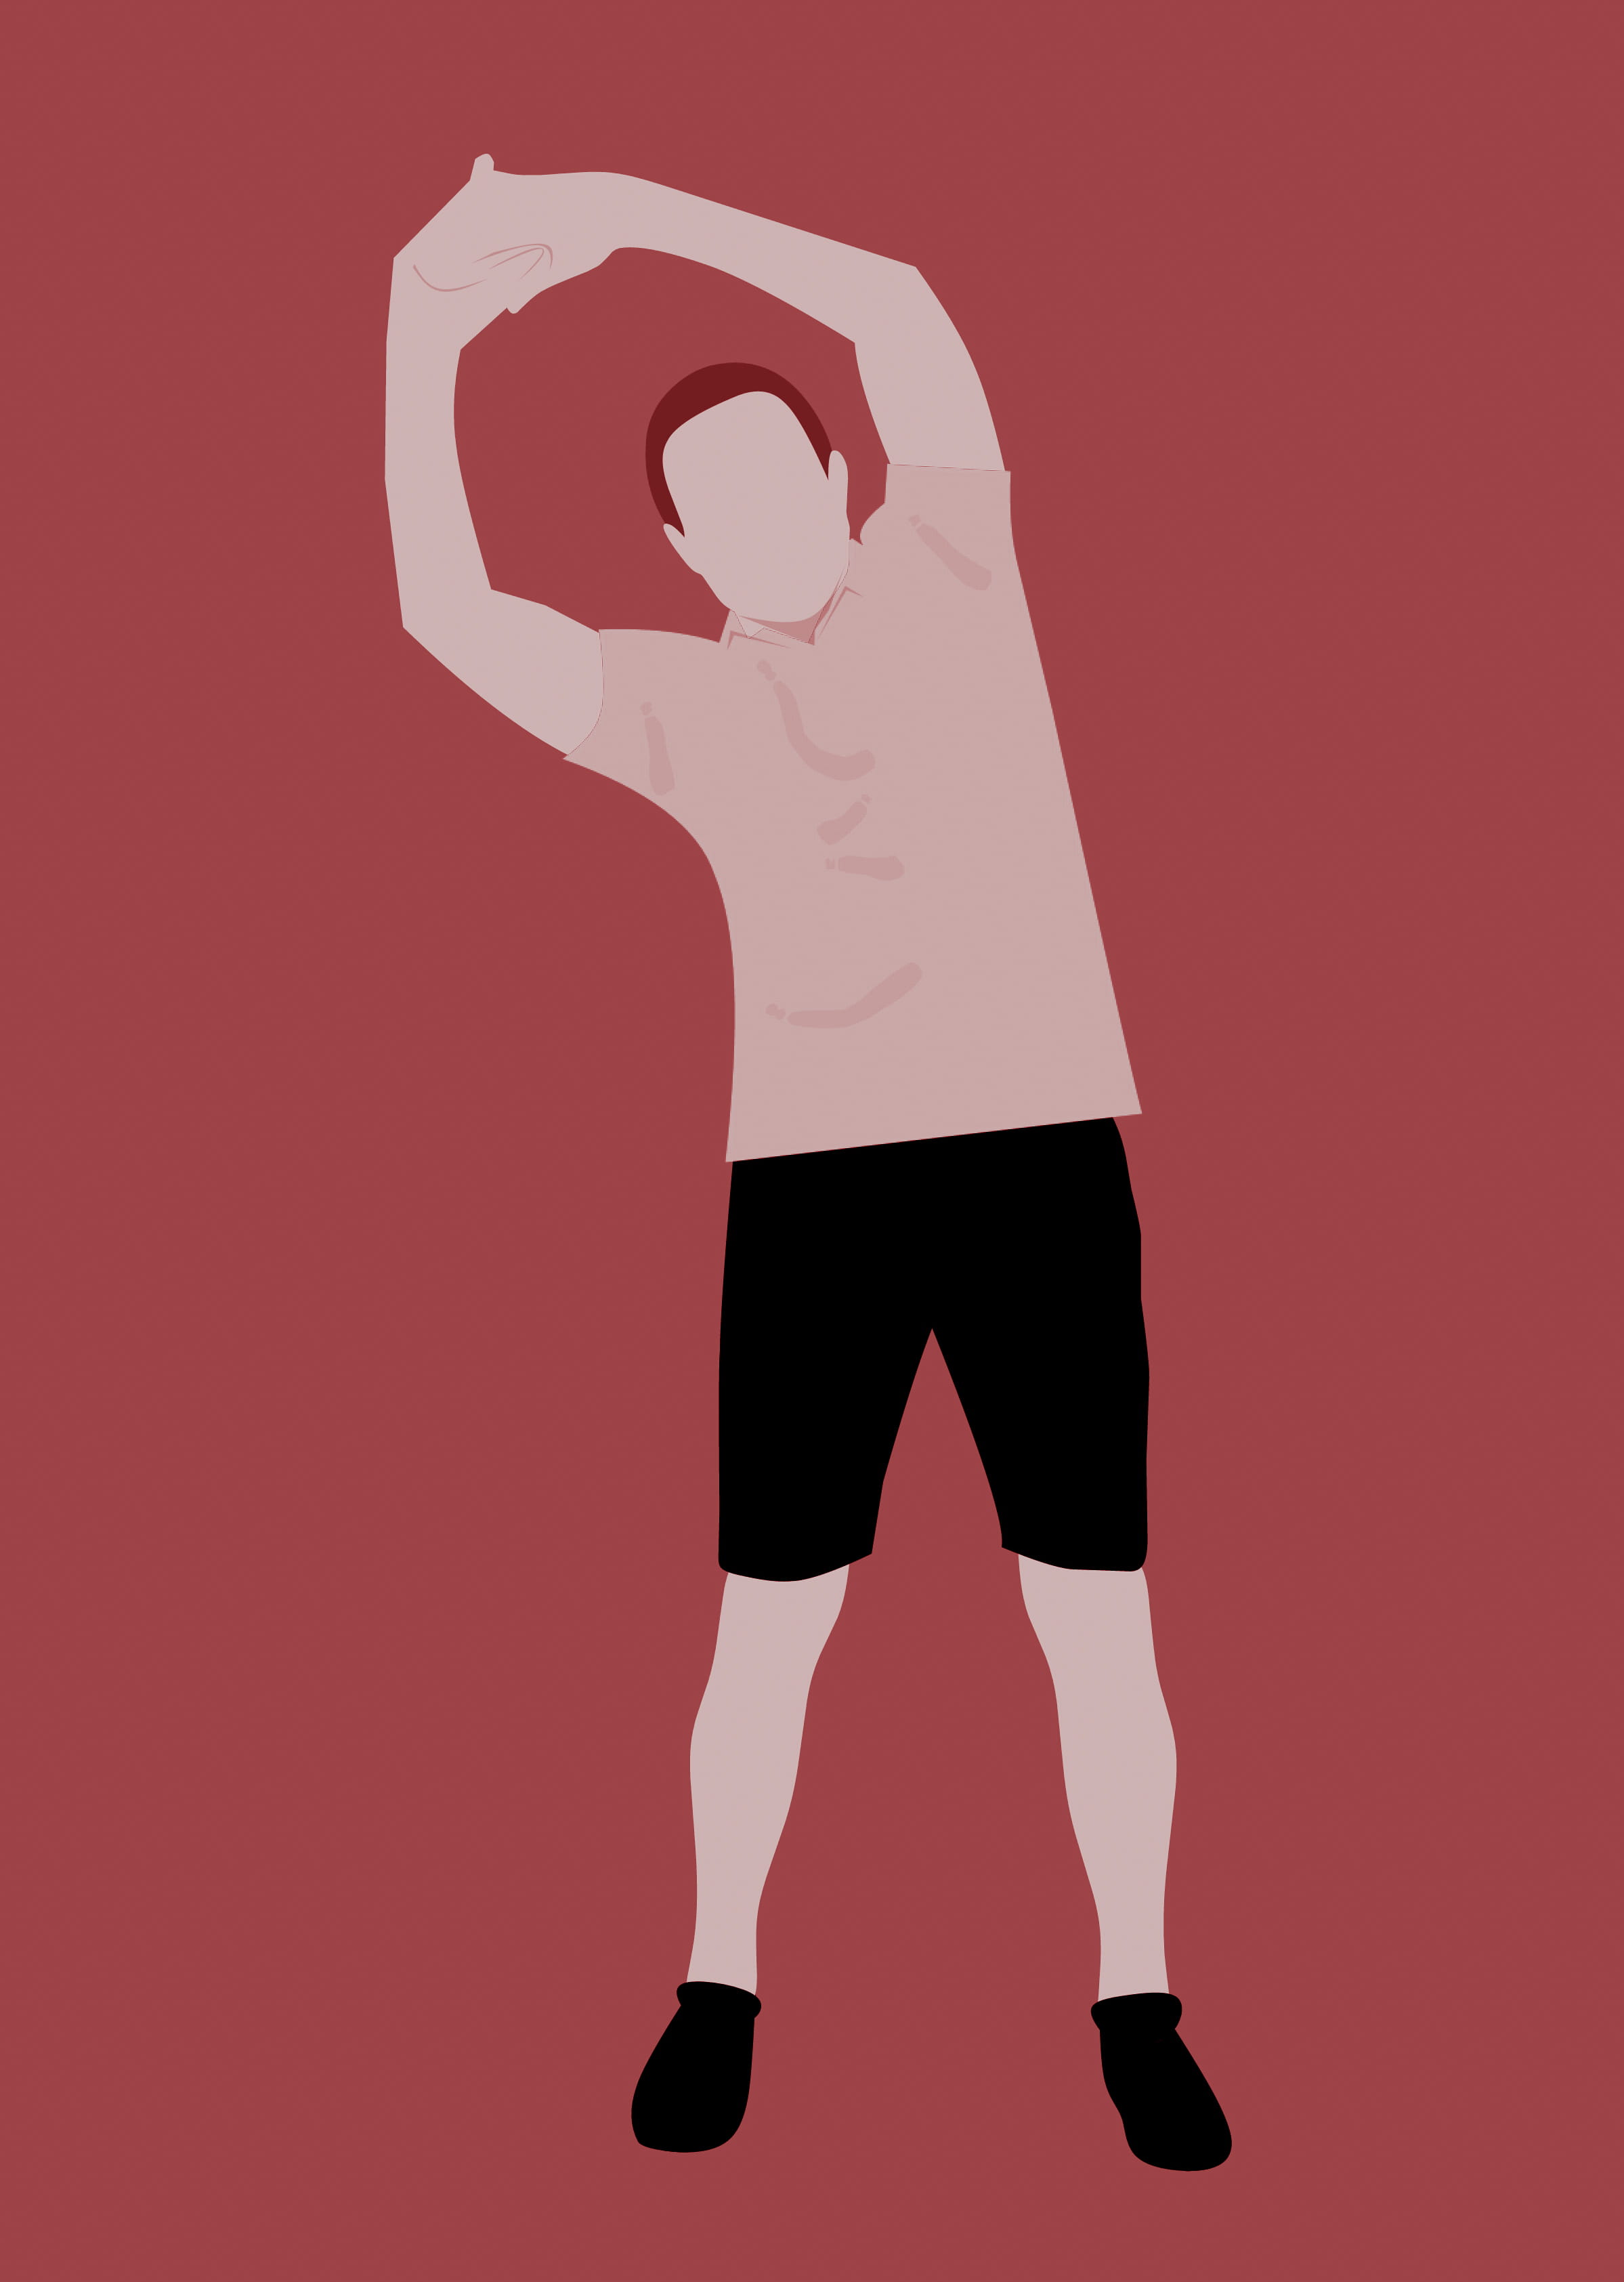 Man stretching in workout gear - illustration., exercise, fitness